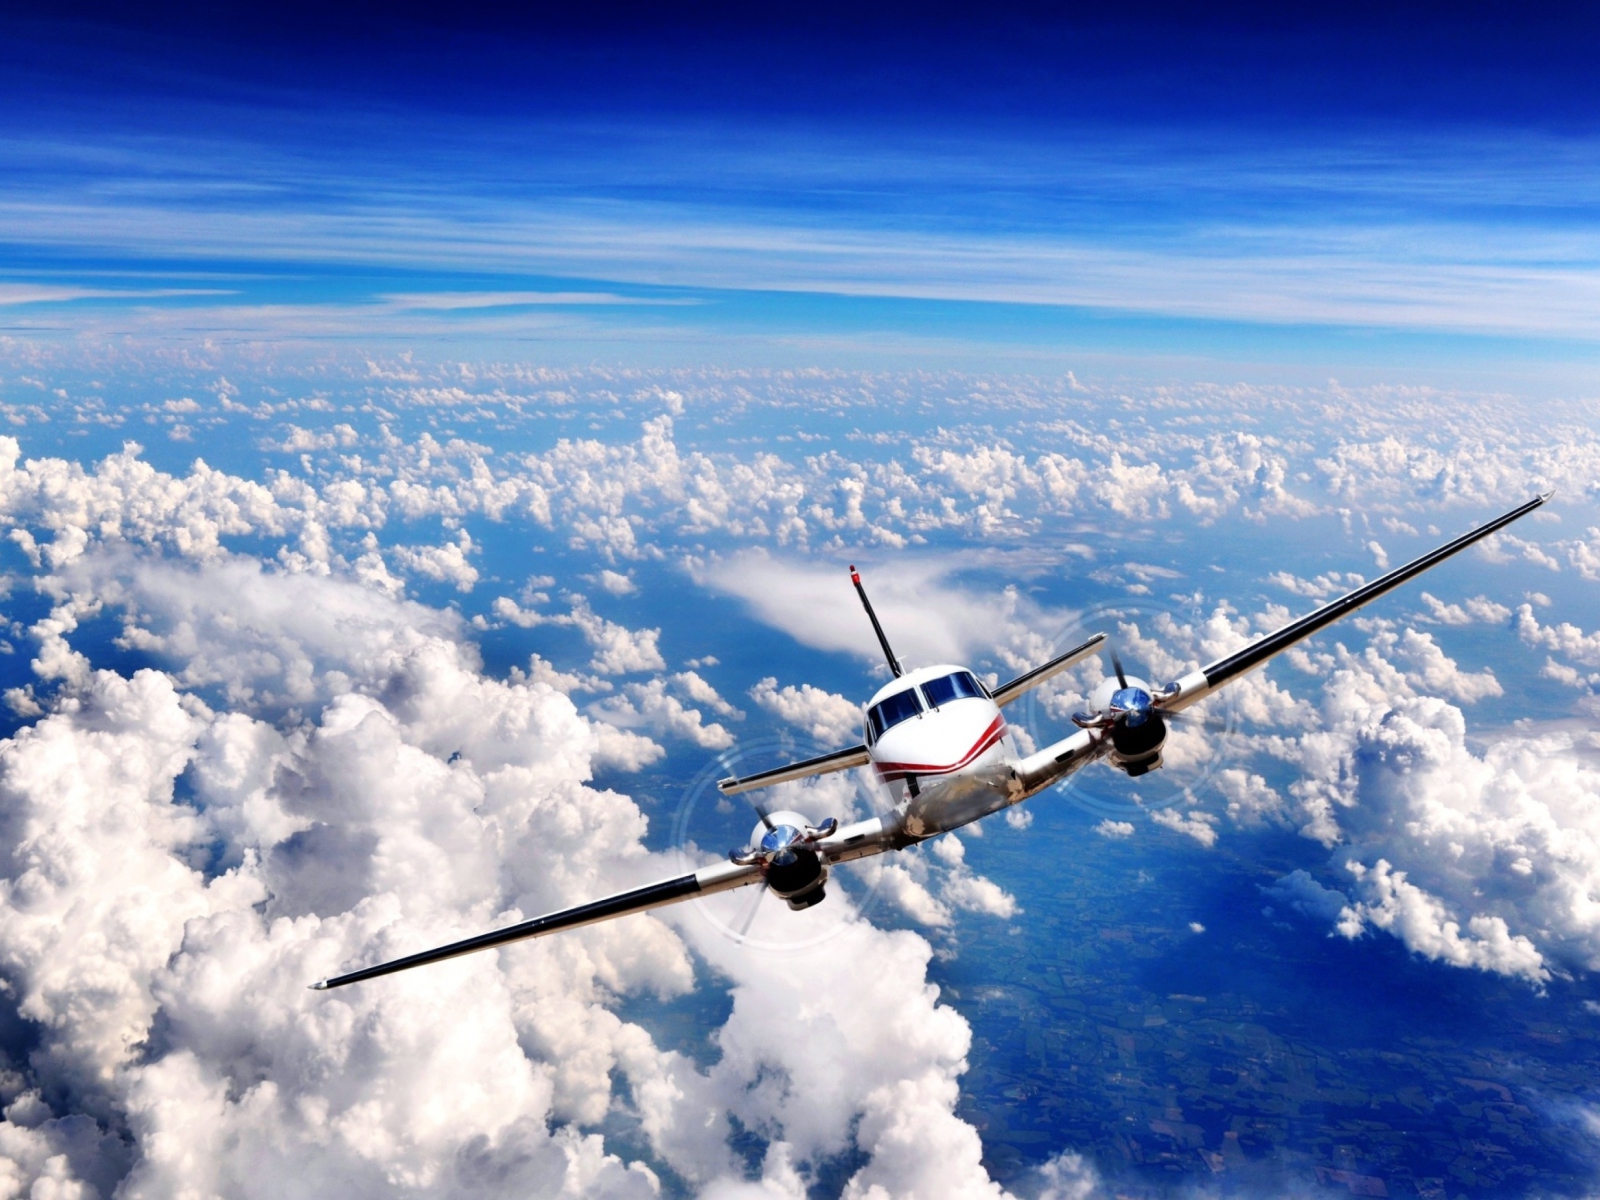 Plane Over The Clouds wallpaper 1600x1200